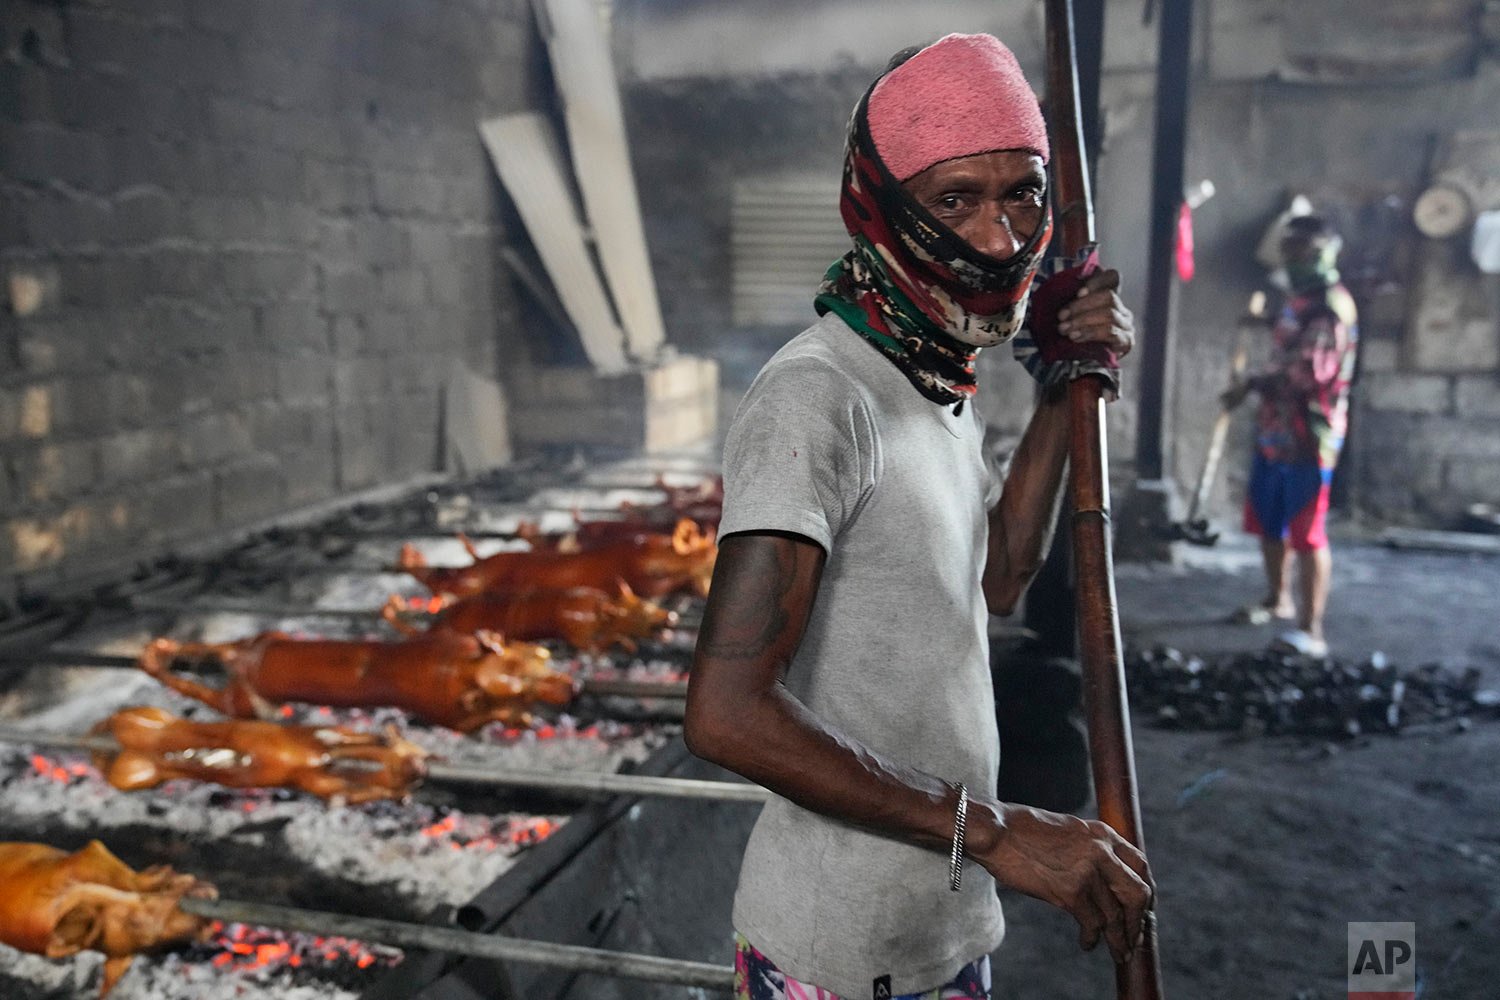  A worker wearing a mask to prevent the spread of the coronavirus cooks roasted pigs in Manila, Philippines on Christmas Eve, Friday, Dec. 24, 2021.  (AP Photo/Aaron Favila) 